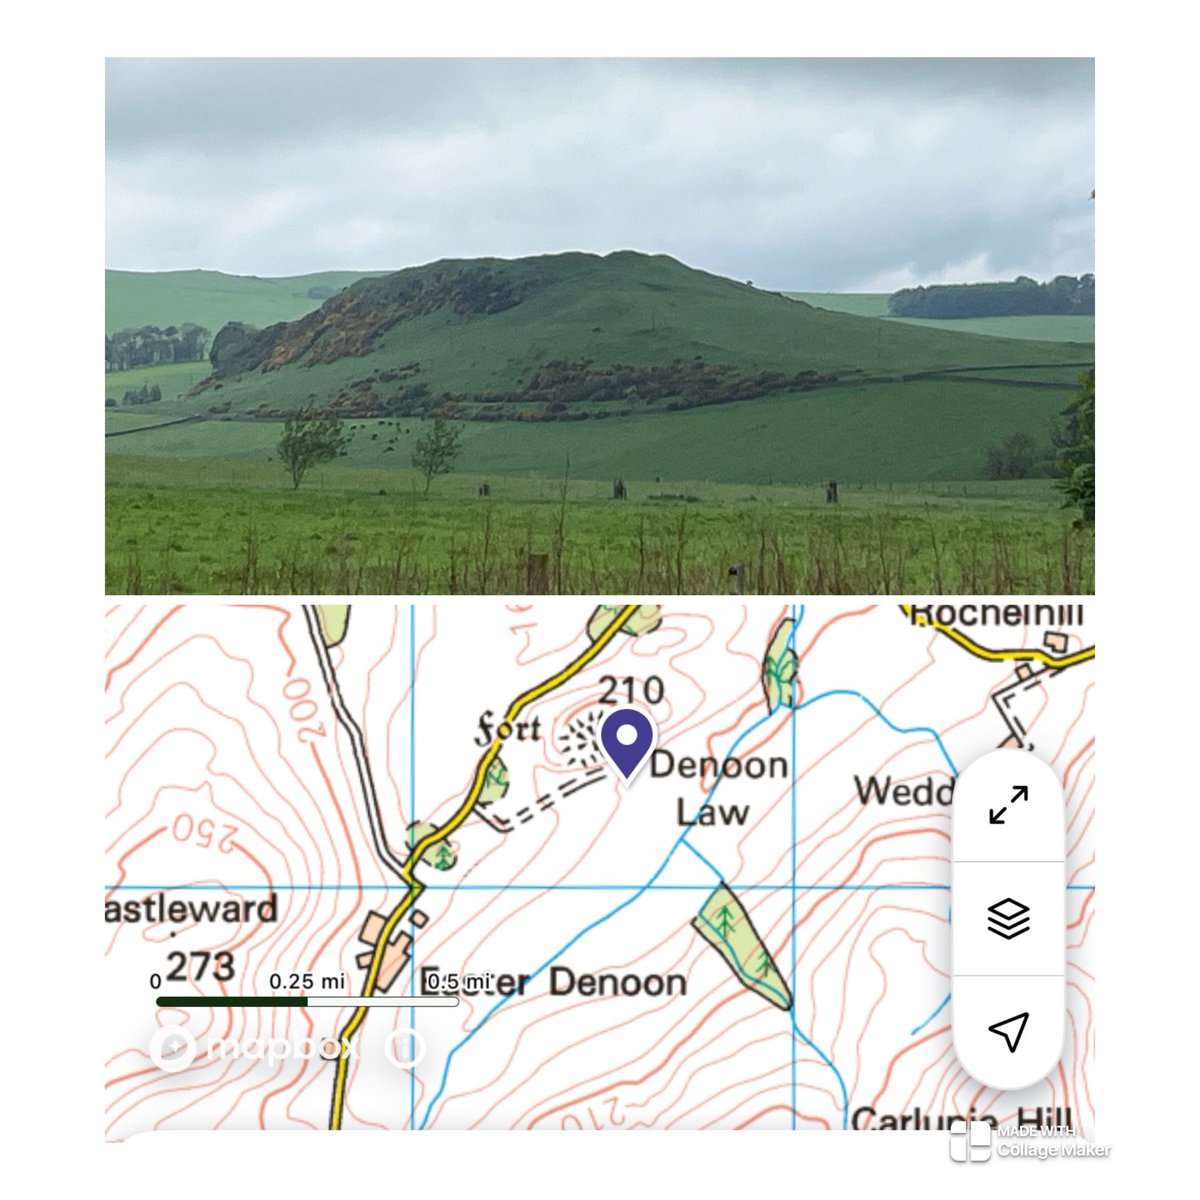 Nestled in the #Angus countryside is Denoon- perfect for #HillfortsWednesday